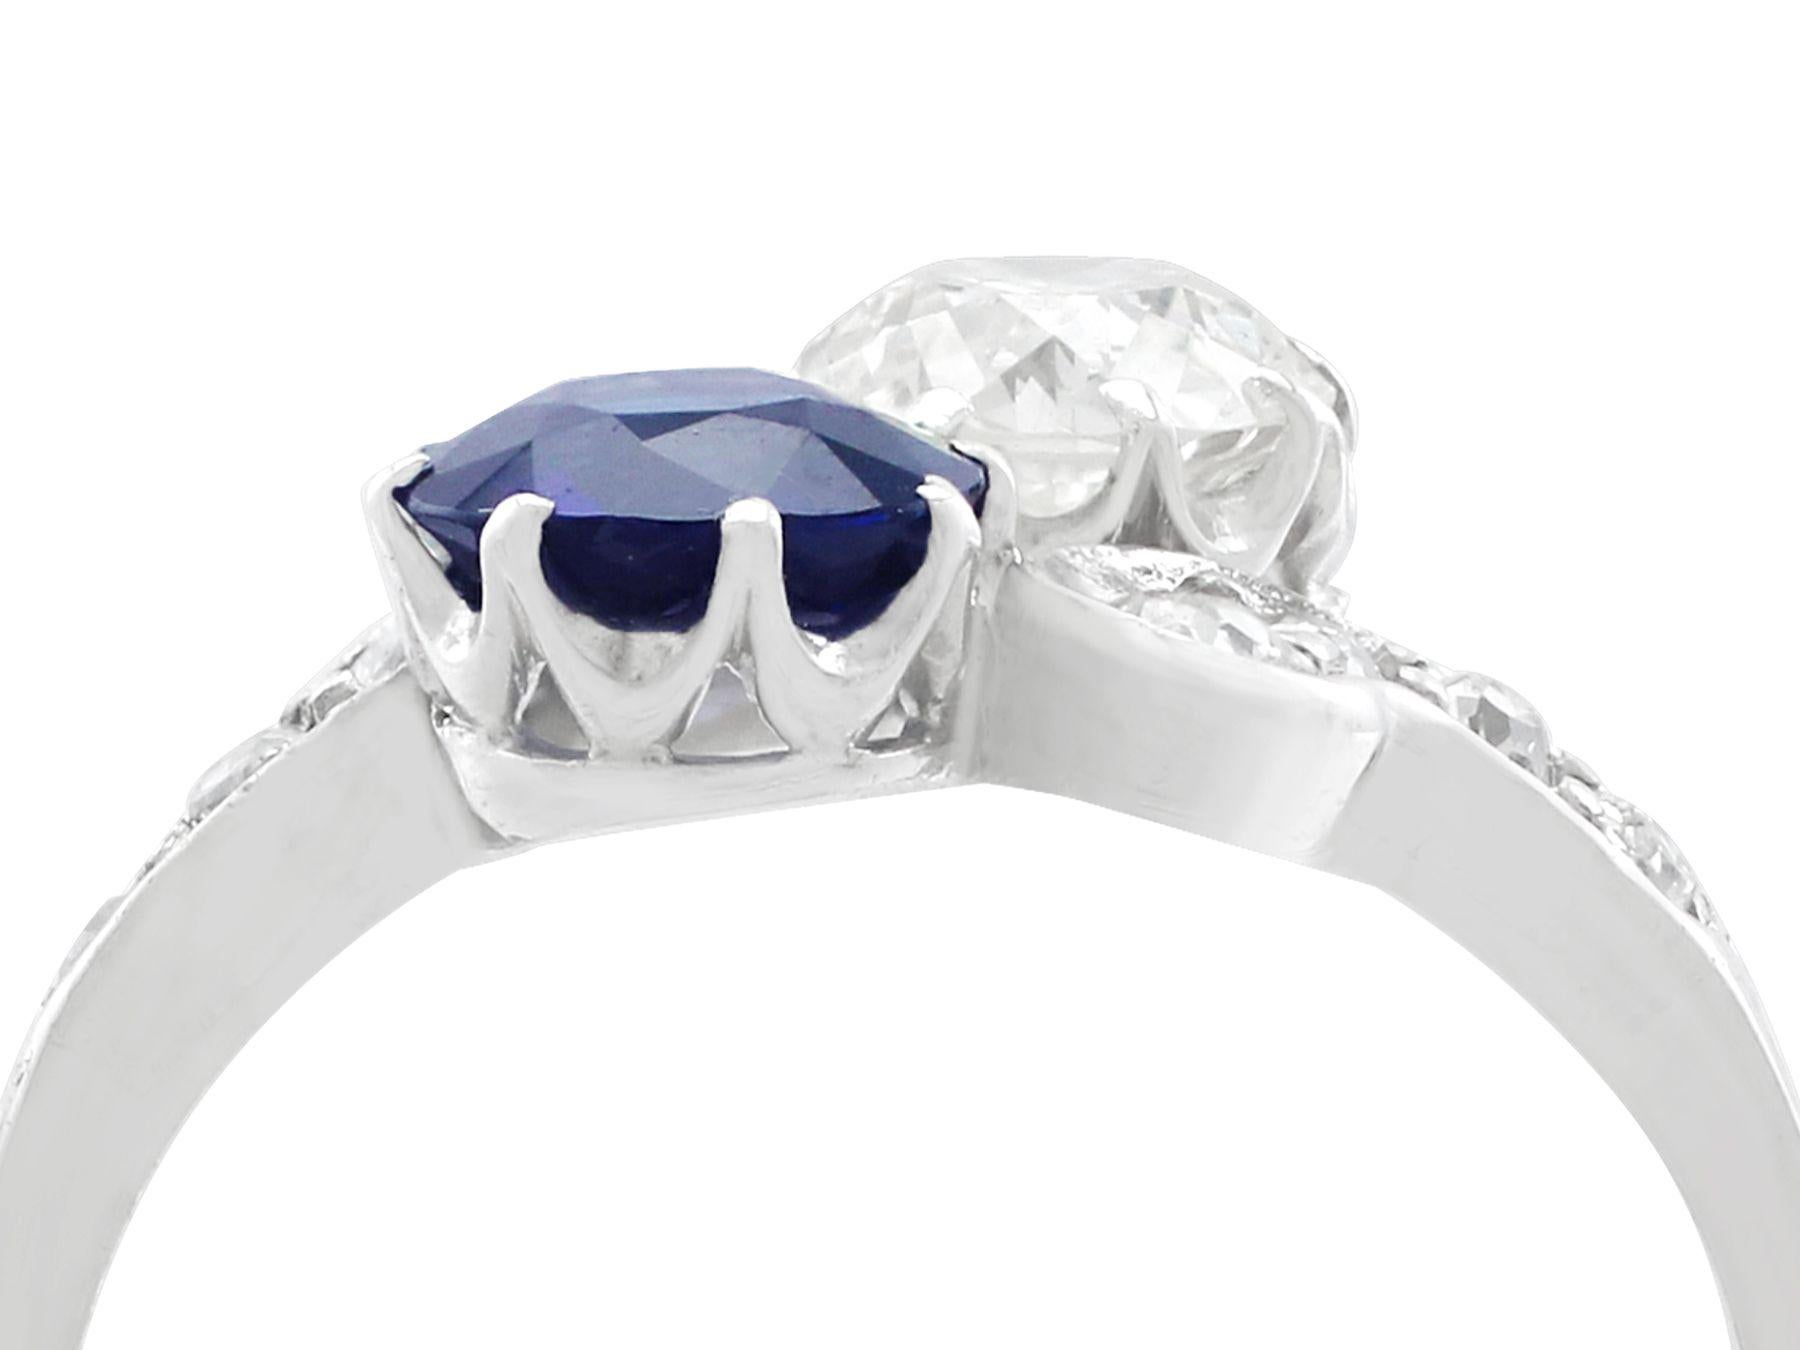 A stunning, fine and impressive Victorian 1.19 carat Basaltic sapphire and 1.28 carat diamond, 18 karat white gold twist ring; part of our diverse antique jewelry collections.

This stunning, fine and impressive Victorian sapphire and diamond ring